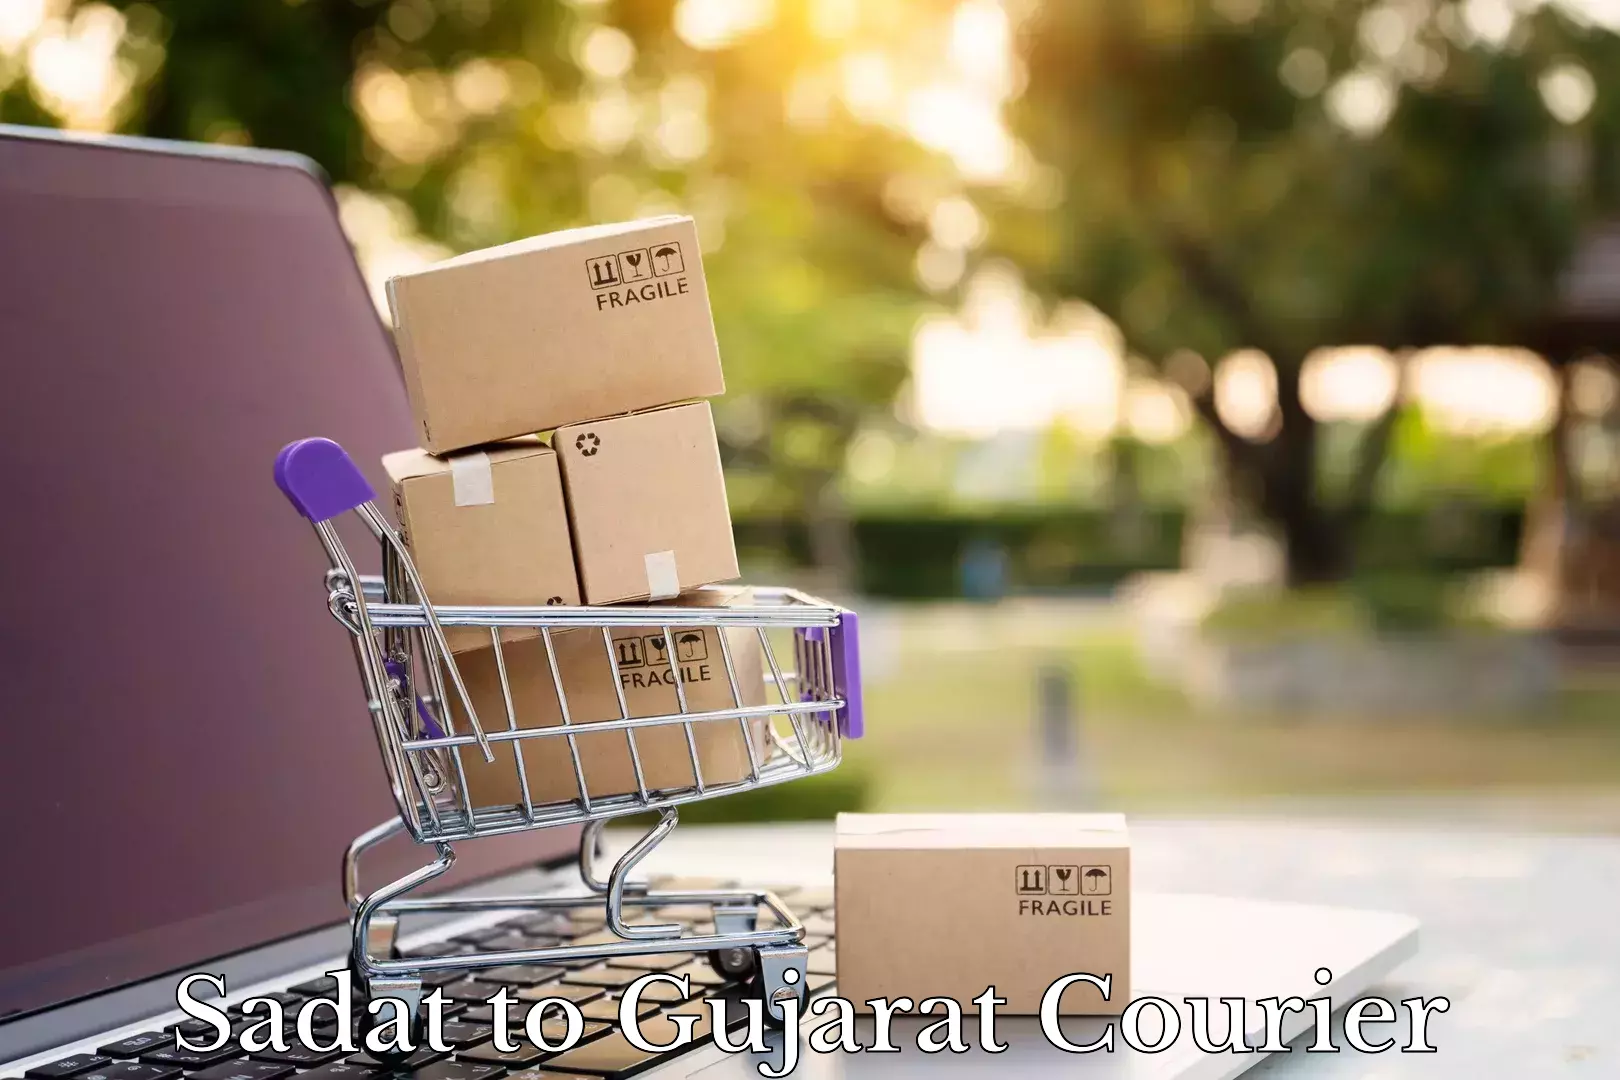 Full-service courier options Sadat to Gujarat